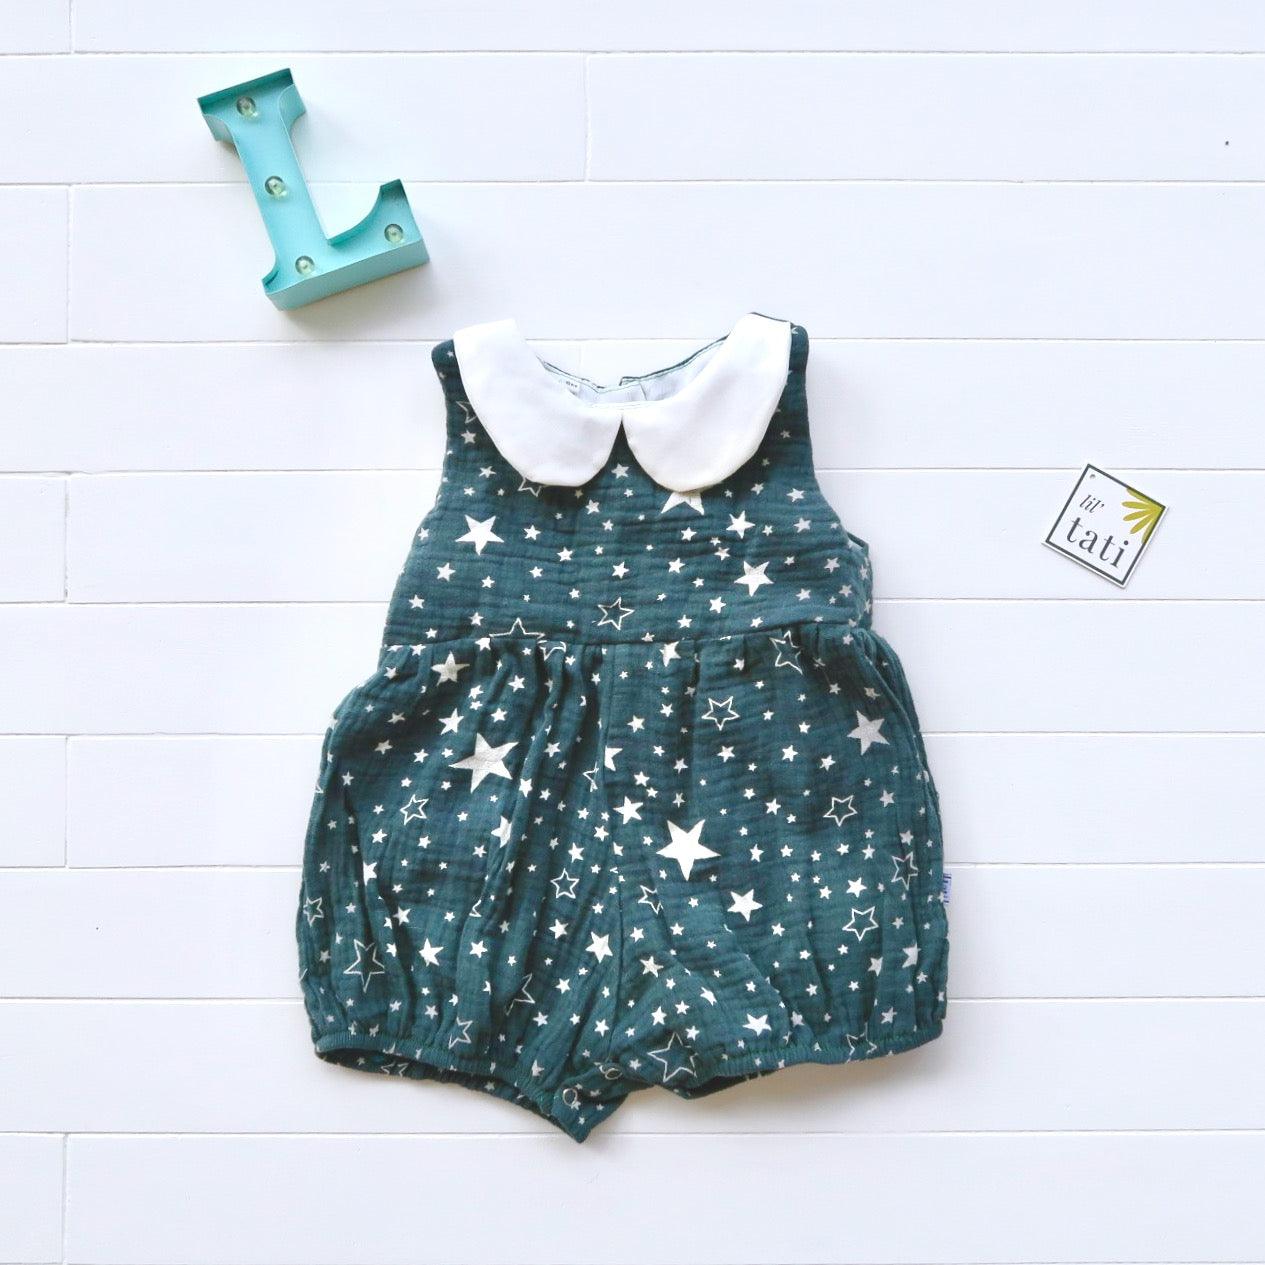 Orchid Playsuit - Collar in Forrest Green Crepe - Lil' Tati